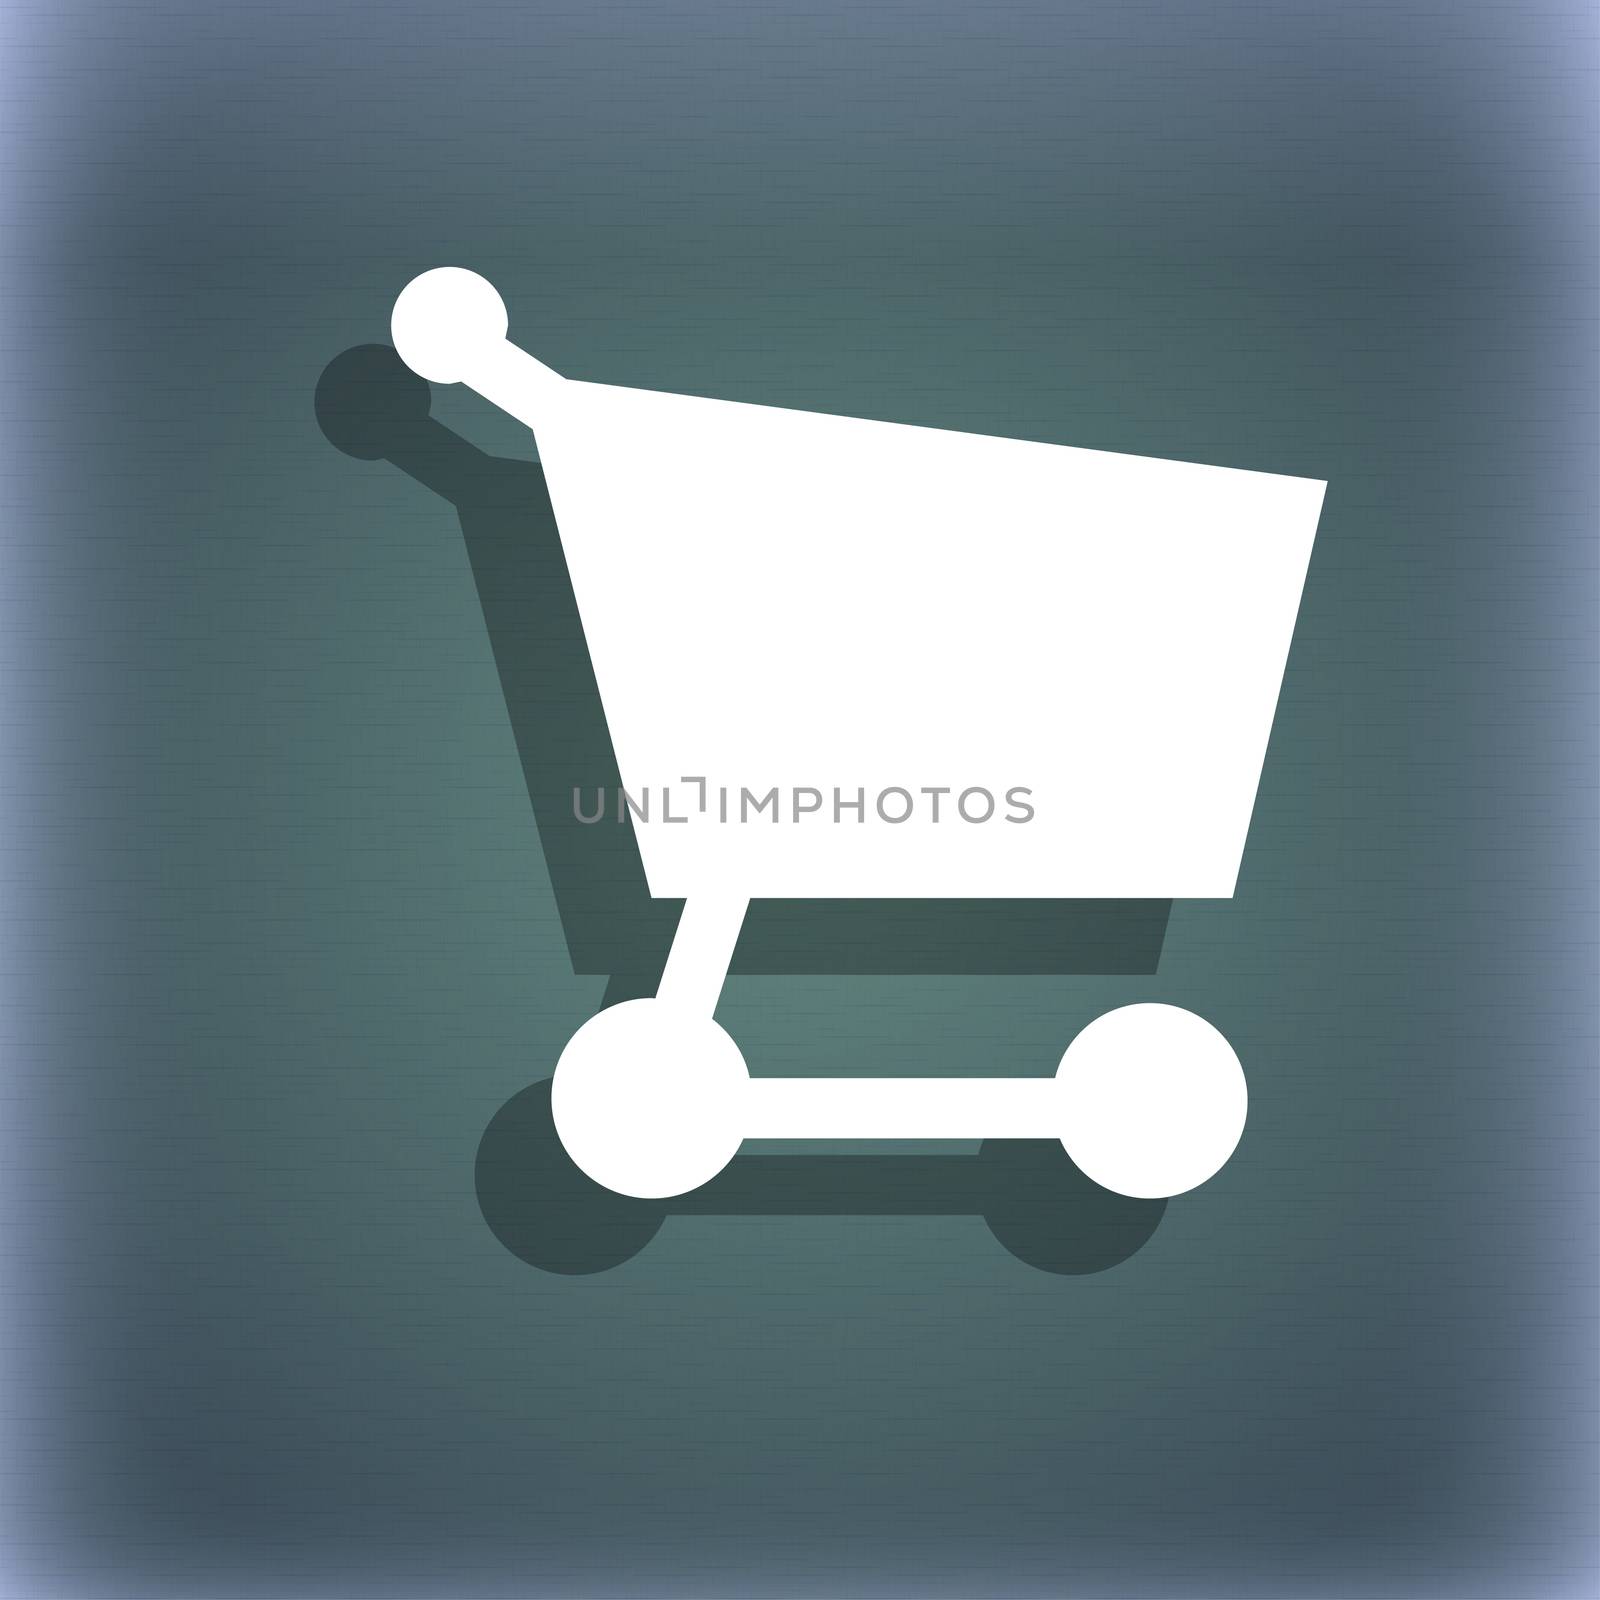 Shopping basket icon symbol on the blue-green abstract background with shadow and space for your text. illustration